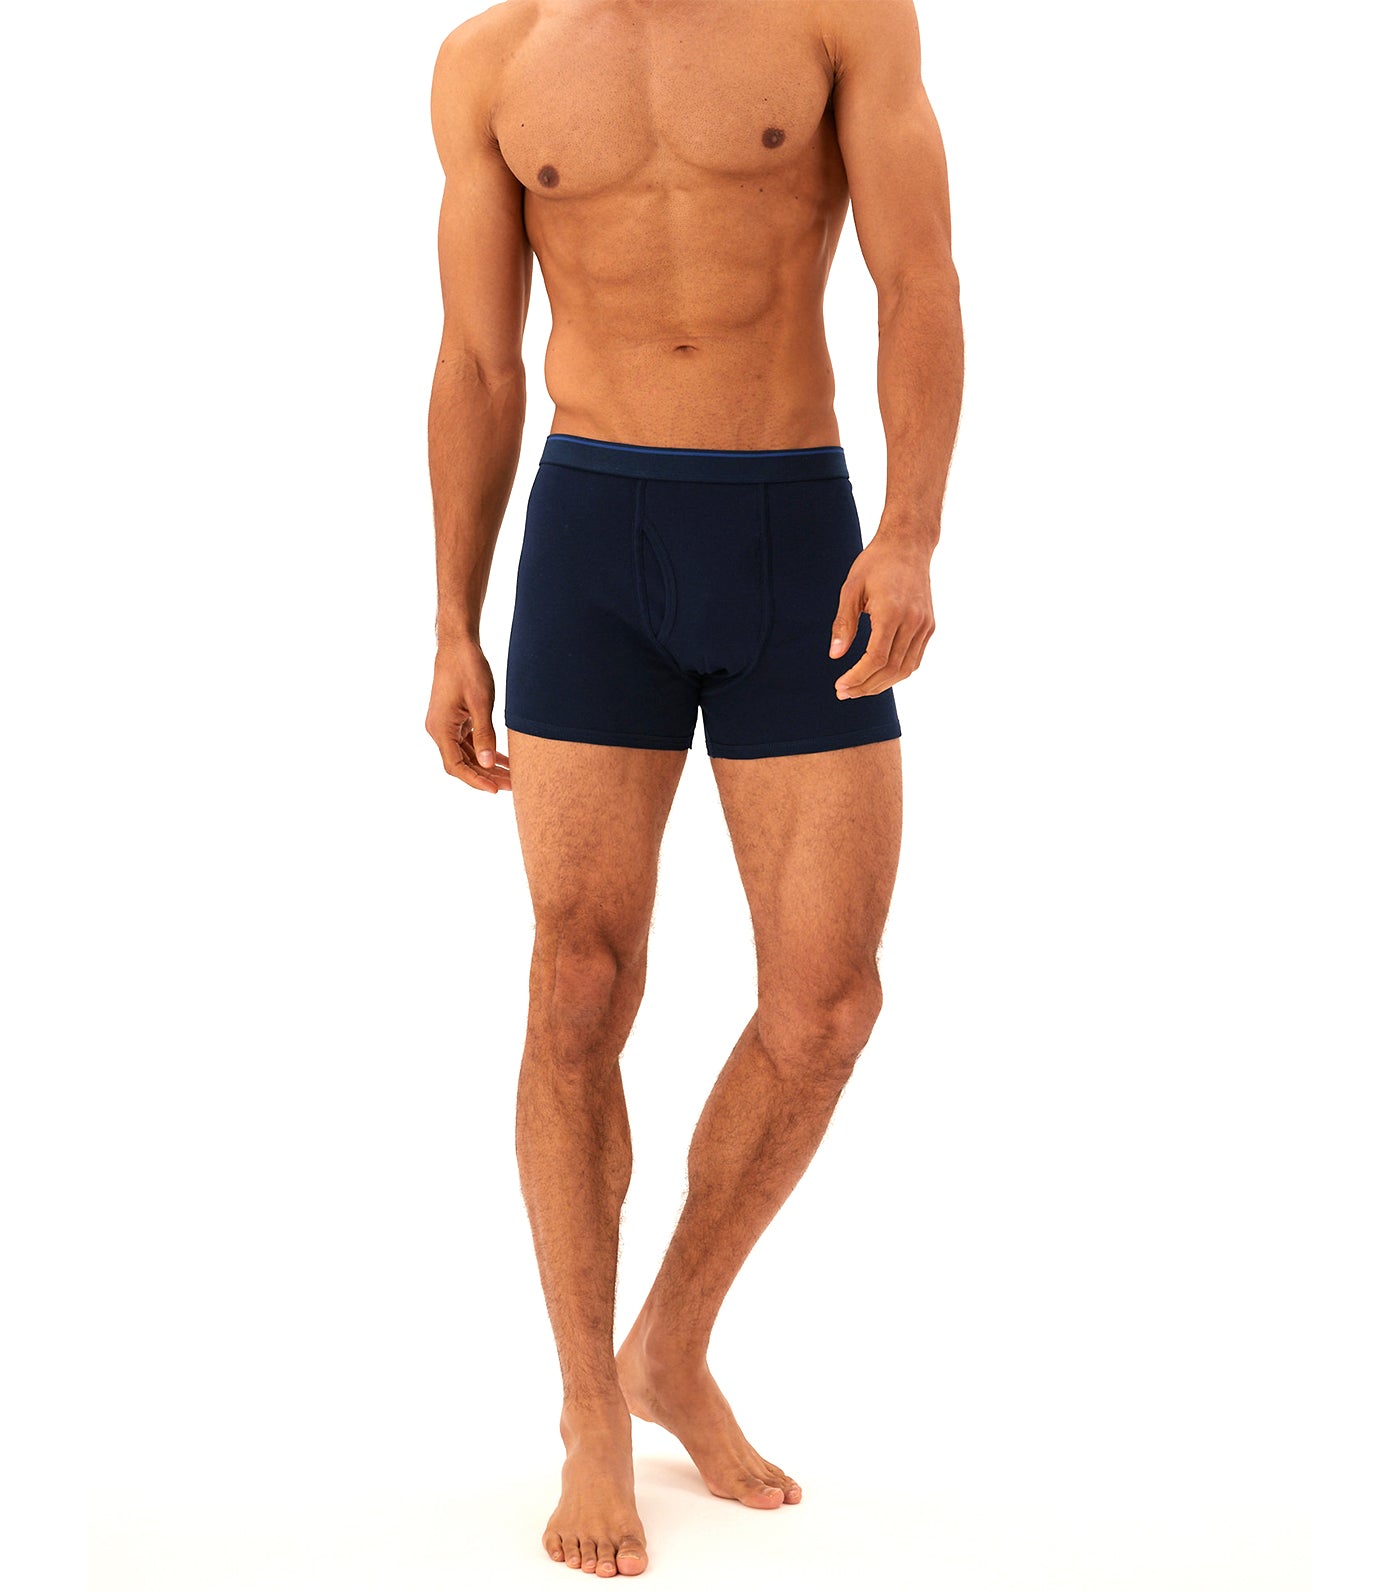 Marks & Spencer Men's 5-Pack Pure Cotton Cool & Fresh Boxer Briefs